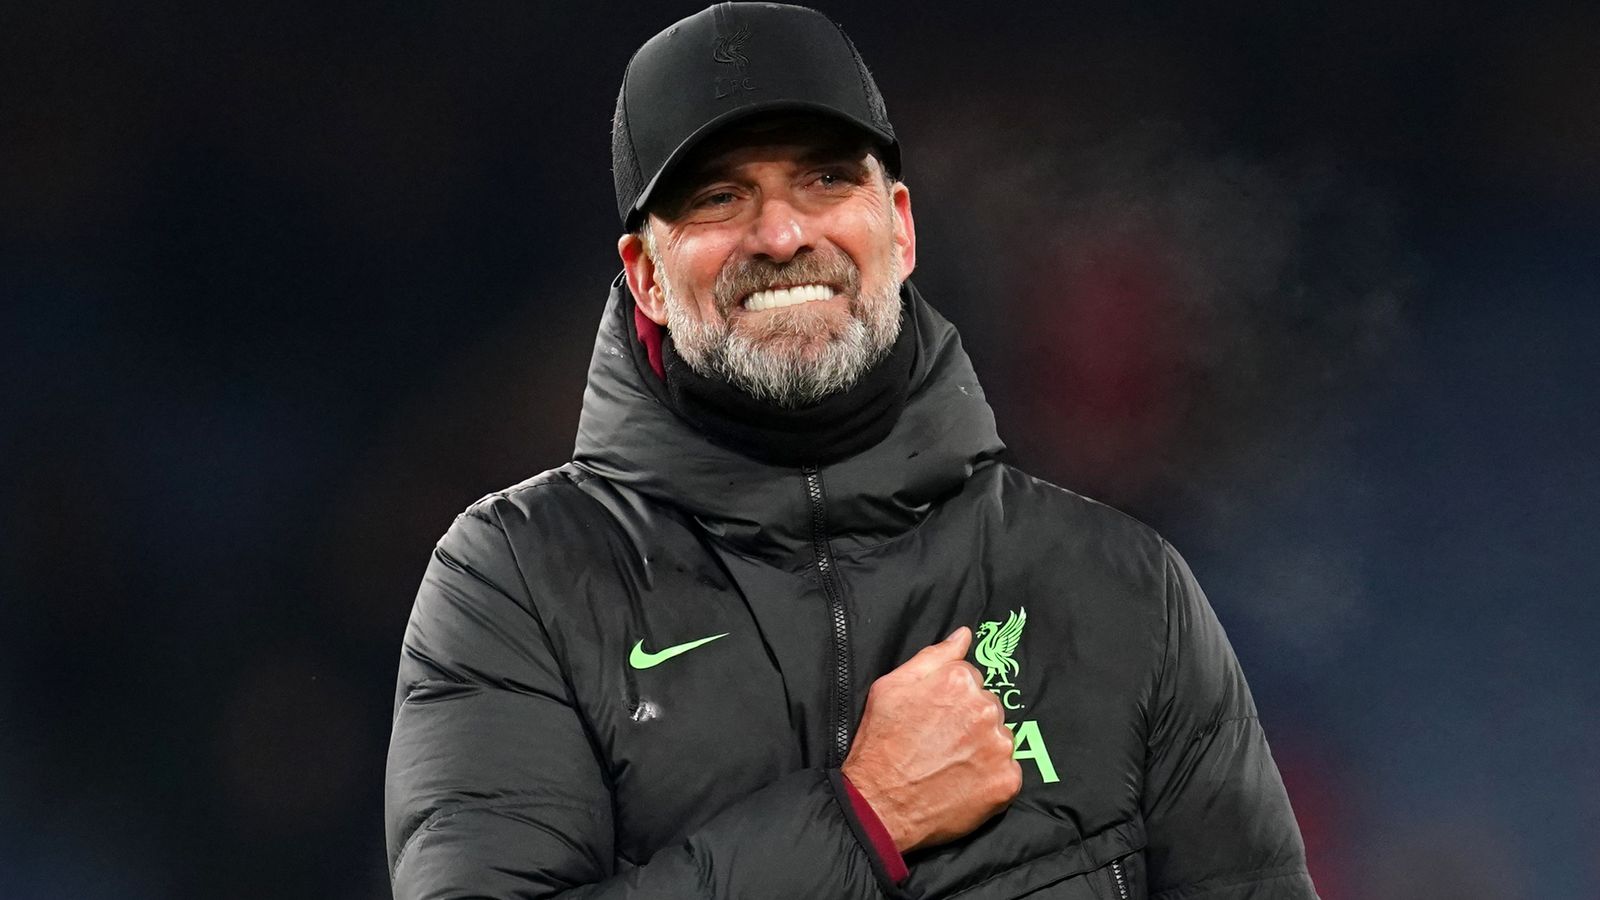 'Liverpool was made for him': Fans prepare to say an emotional farewell to Jurgen Klopp